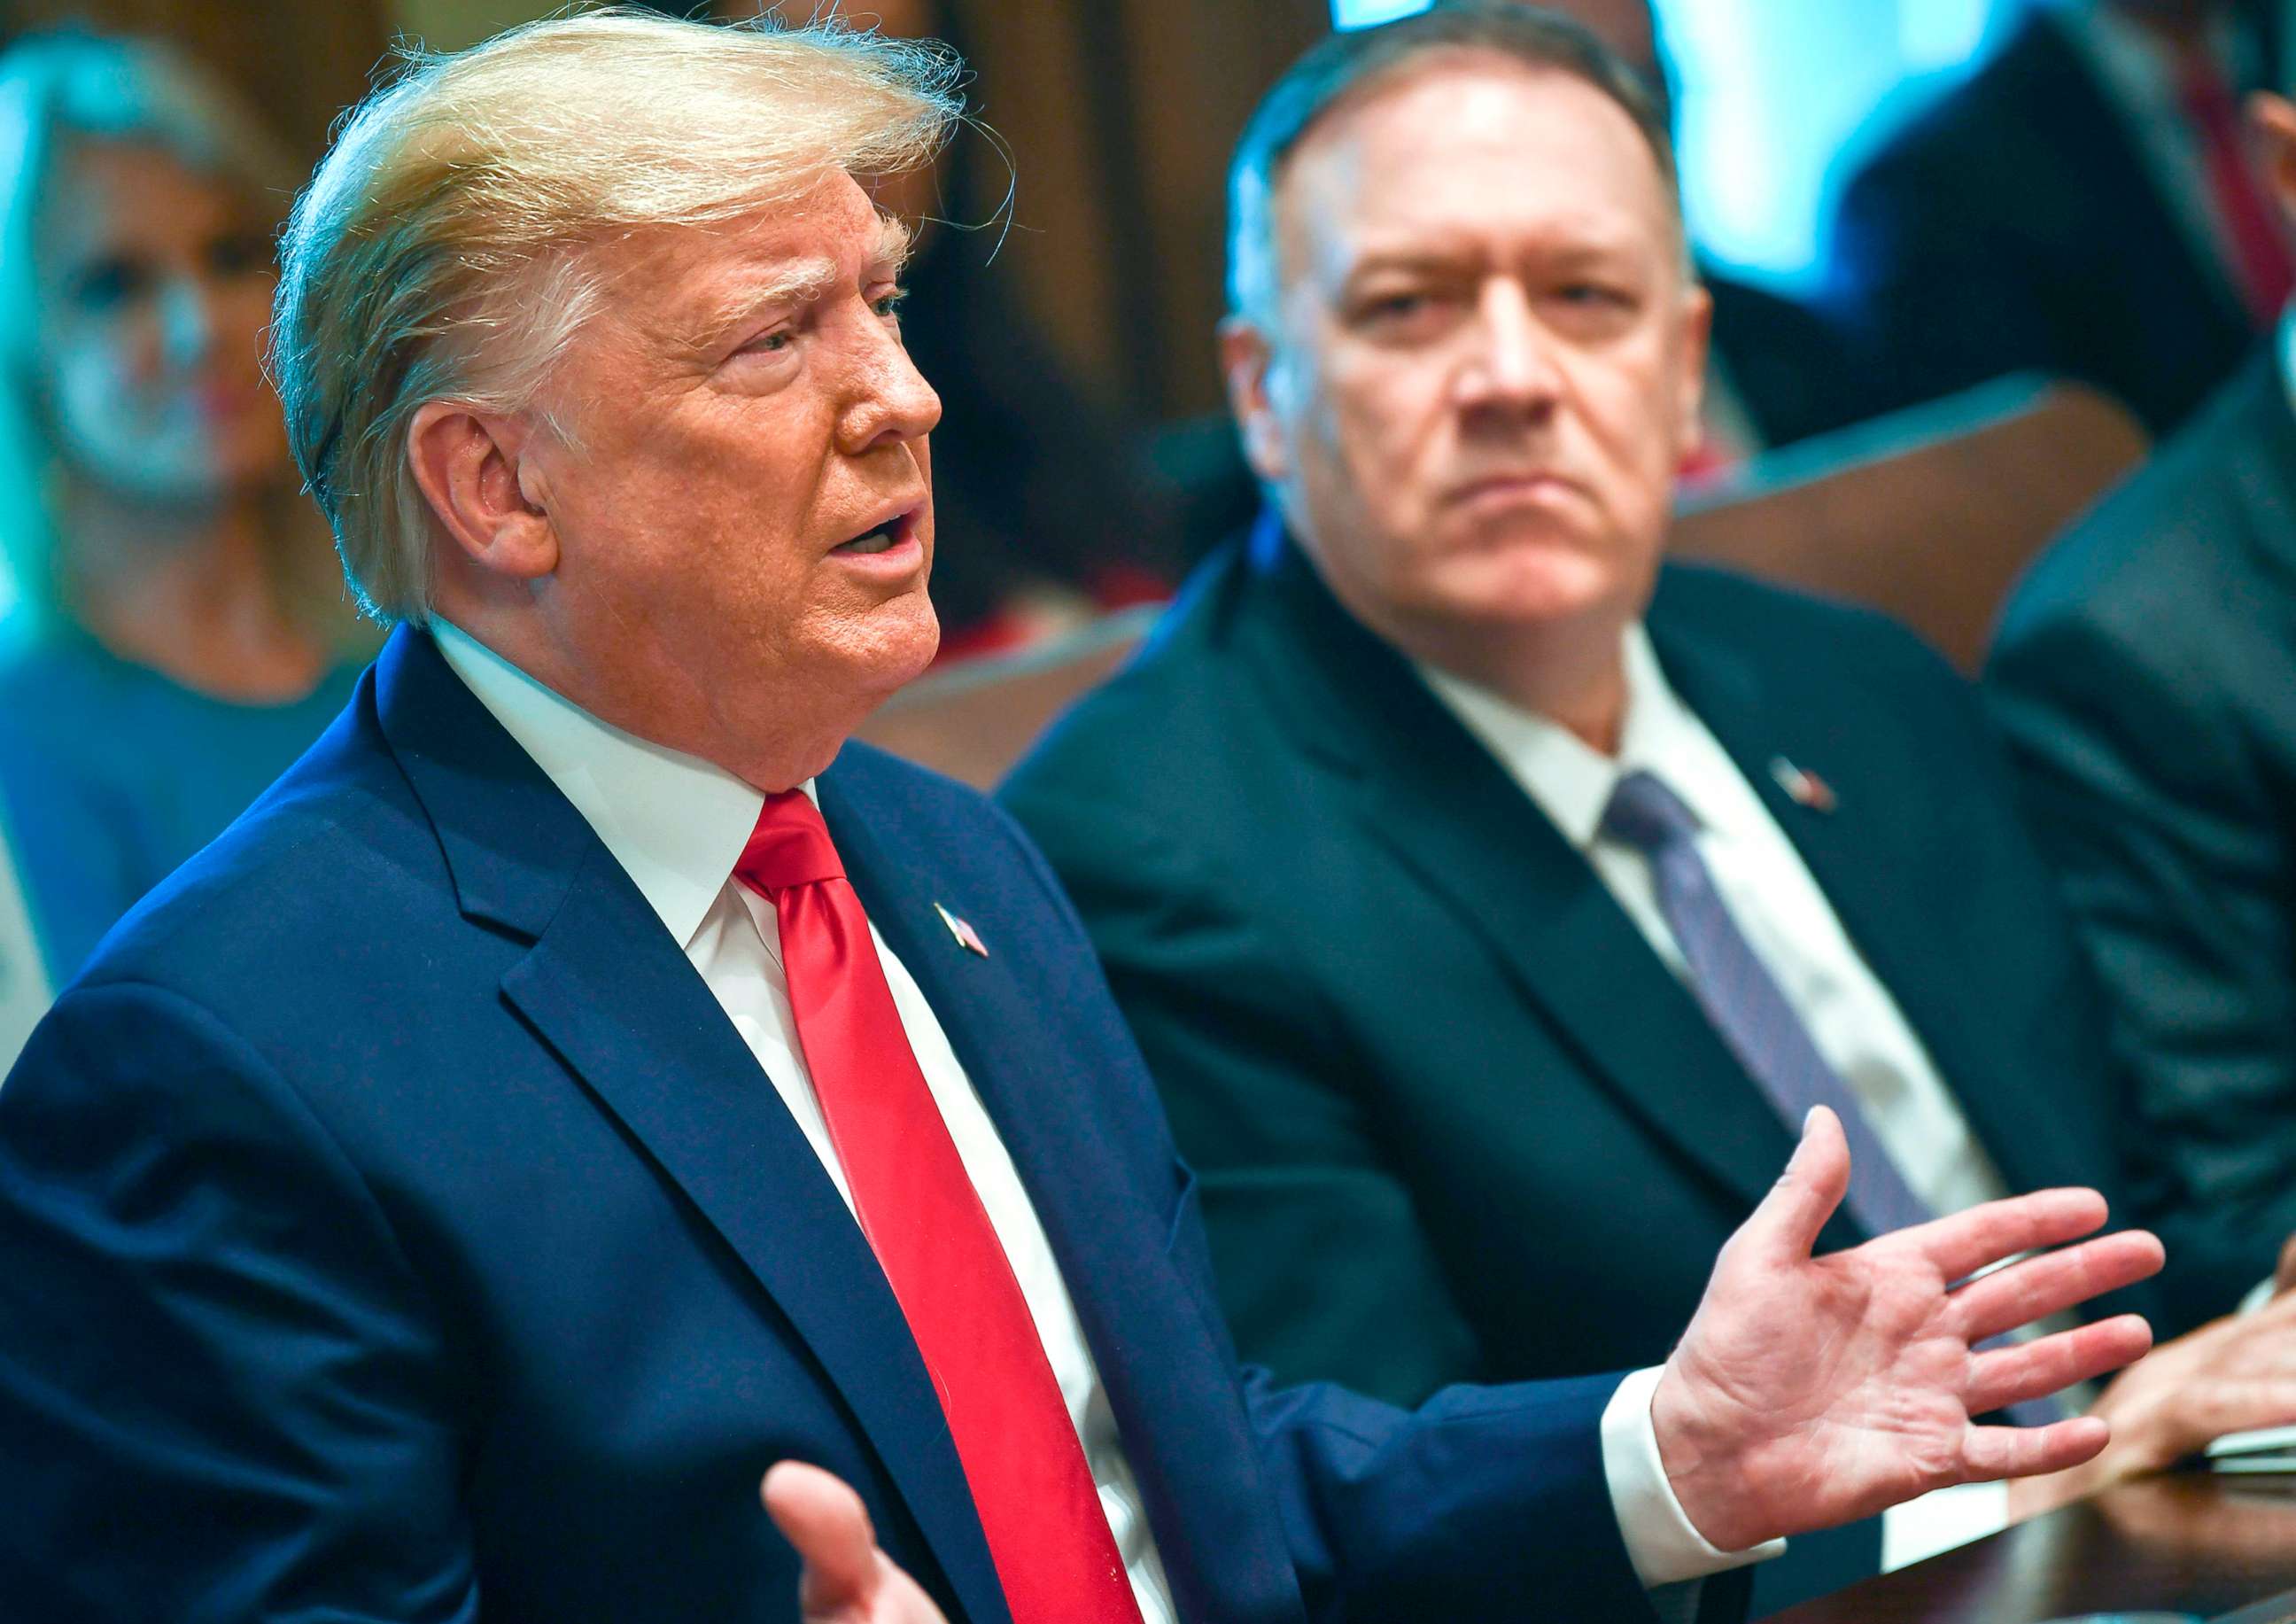 PHOTO: President Donald Trump speaks next to Secretary of State Mike Pompeo during a Cabinet Meeting at the White House, Oct. 21, 2019.